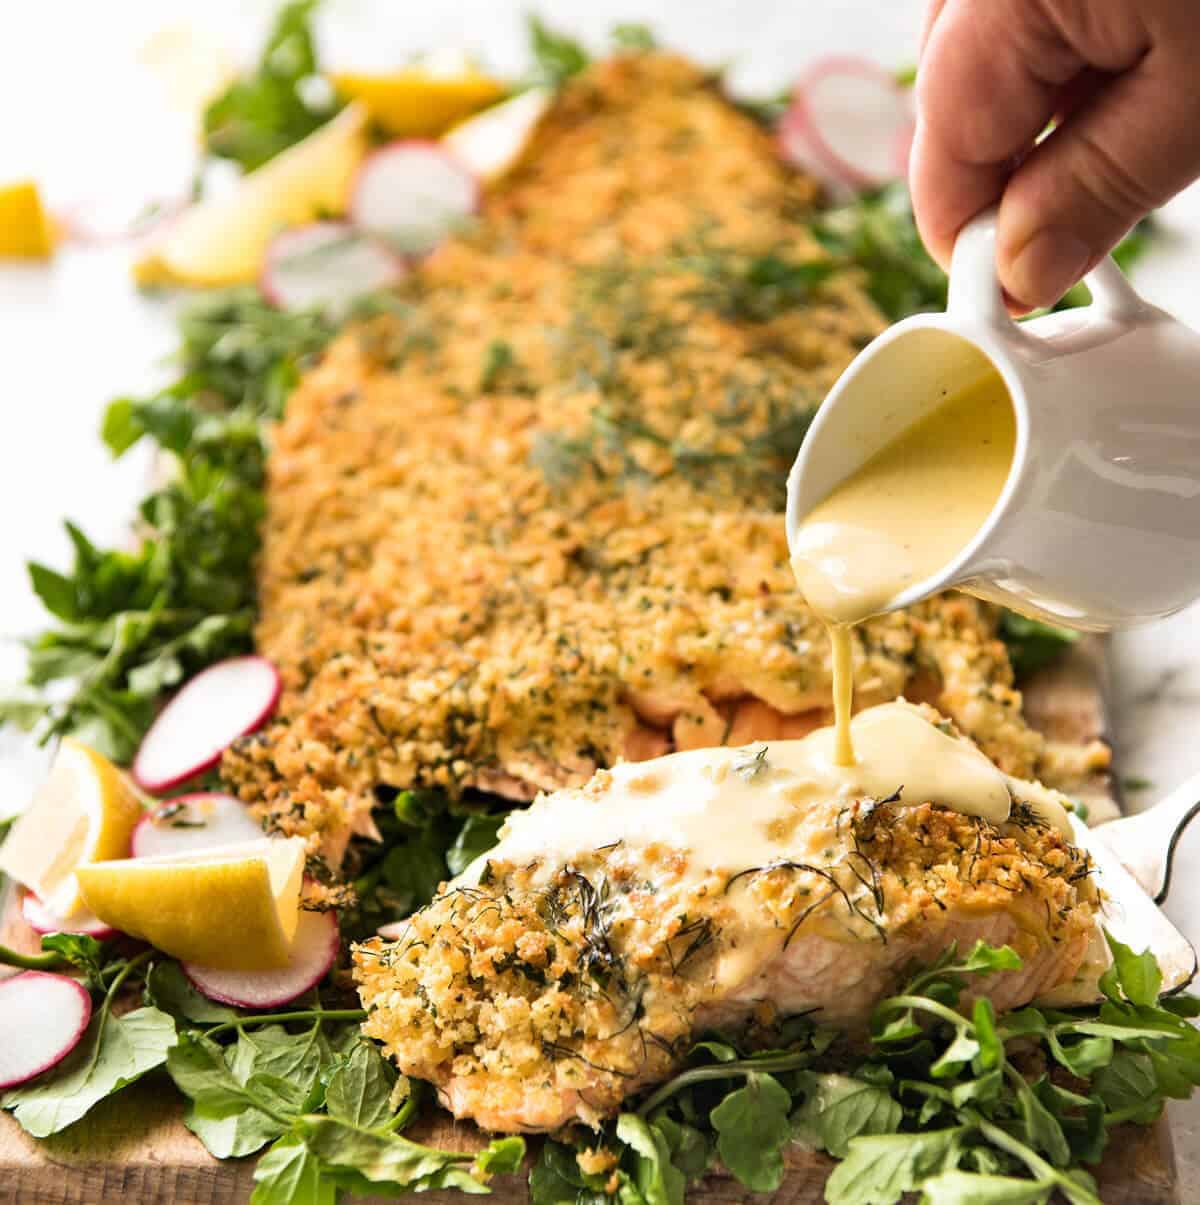 Baked Parmesan Crusted Salmon with Lemon Cream Sauce - easy and fast to make, can be prepared ahead, a stunning centrepiece for Christmas dinner and yet easy enough for midweek. That Lemon Cream sauce is the perfectly finishing tough. www.recipetineats.com